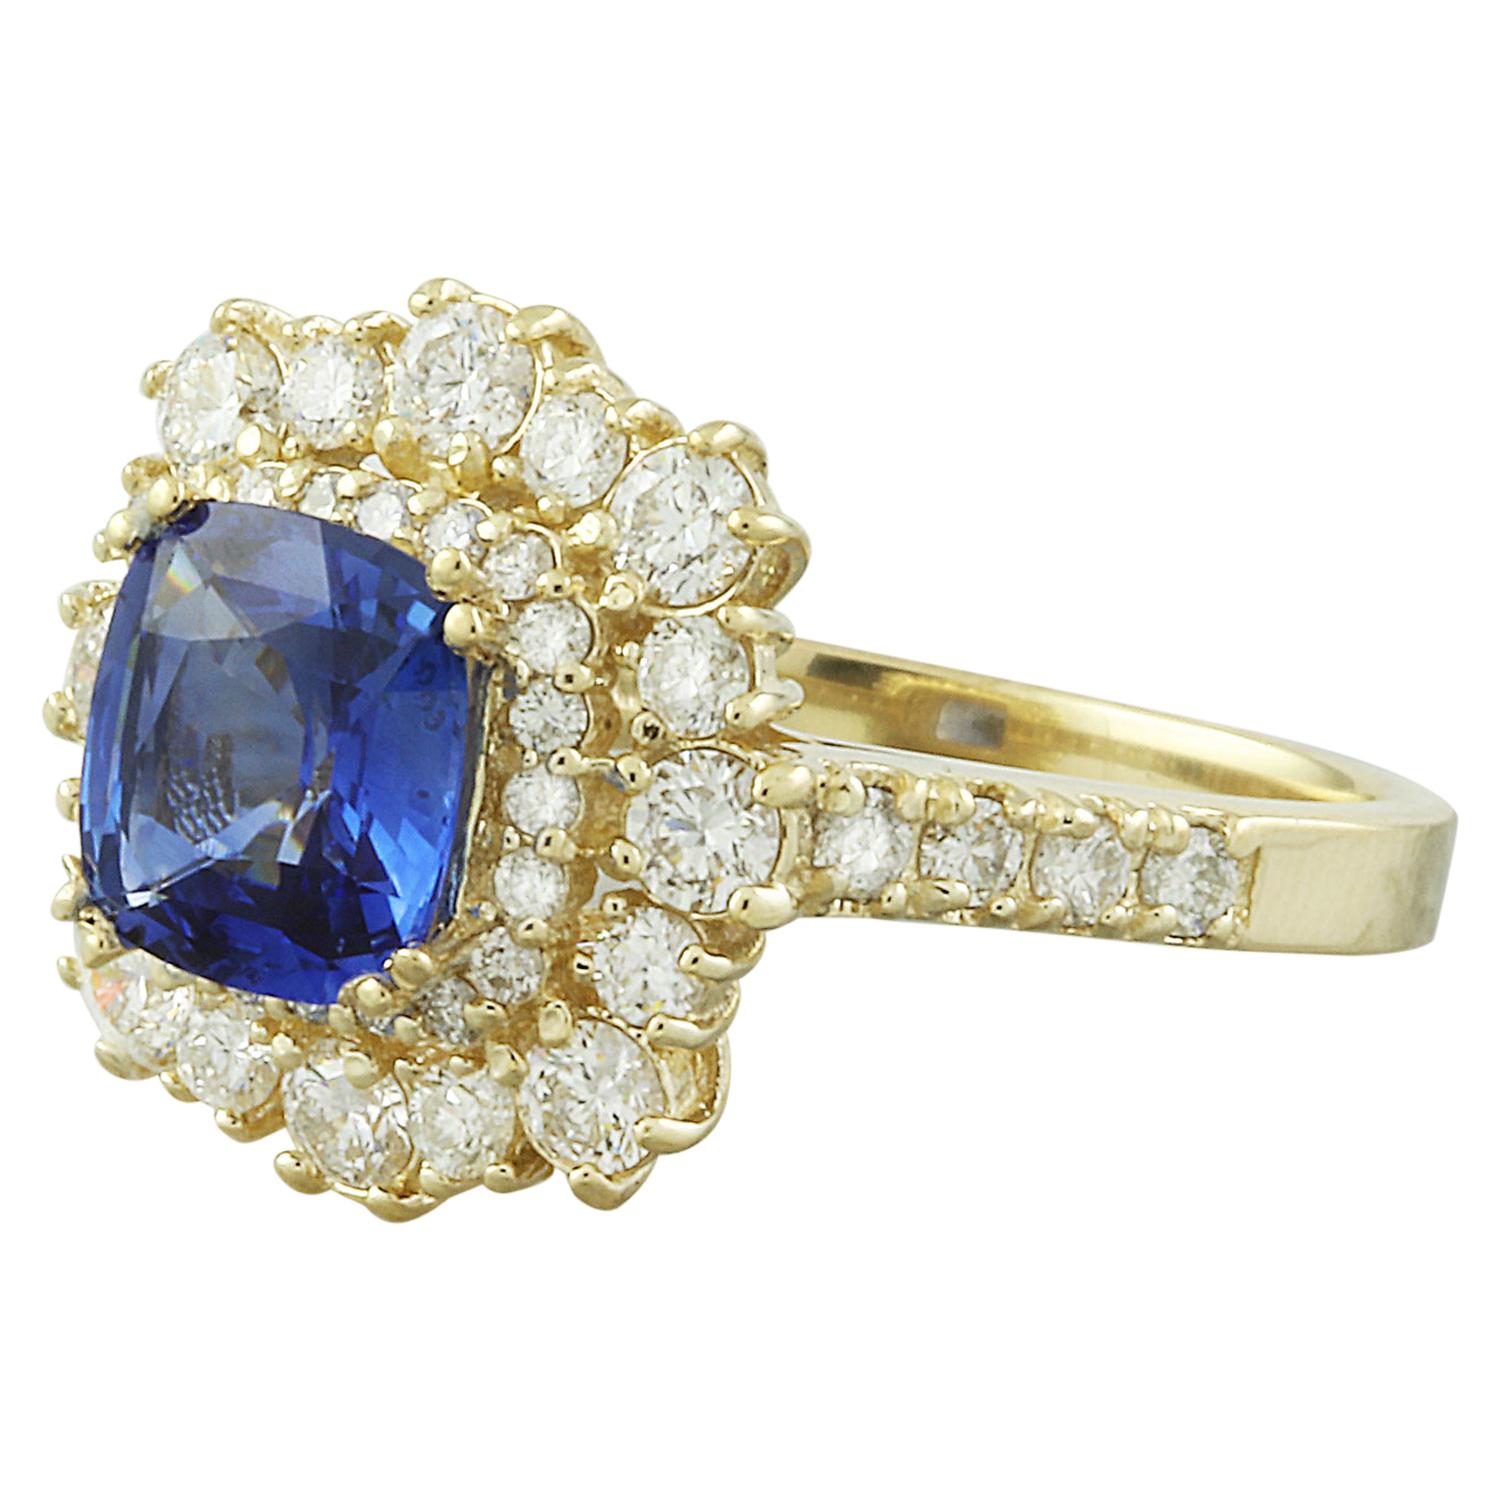 Adorn your hand with elegance and grace wearing this exquisite 1.70 Carat Natural Tanzanite 14K Solid Yellow Gold Diamond Ring. Crafted with precision, the ring bears the distinguished 14K stamp, ensuring its authenticity. Weighing 4.3 grams, it